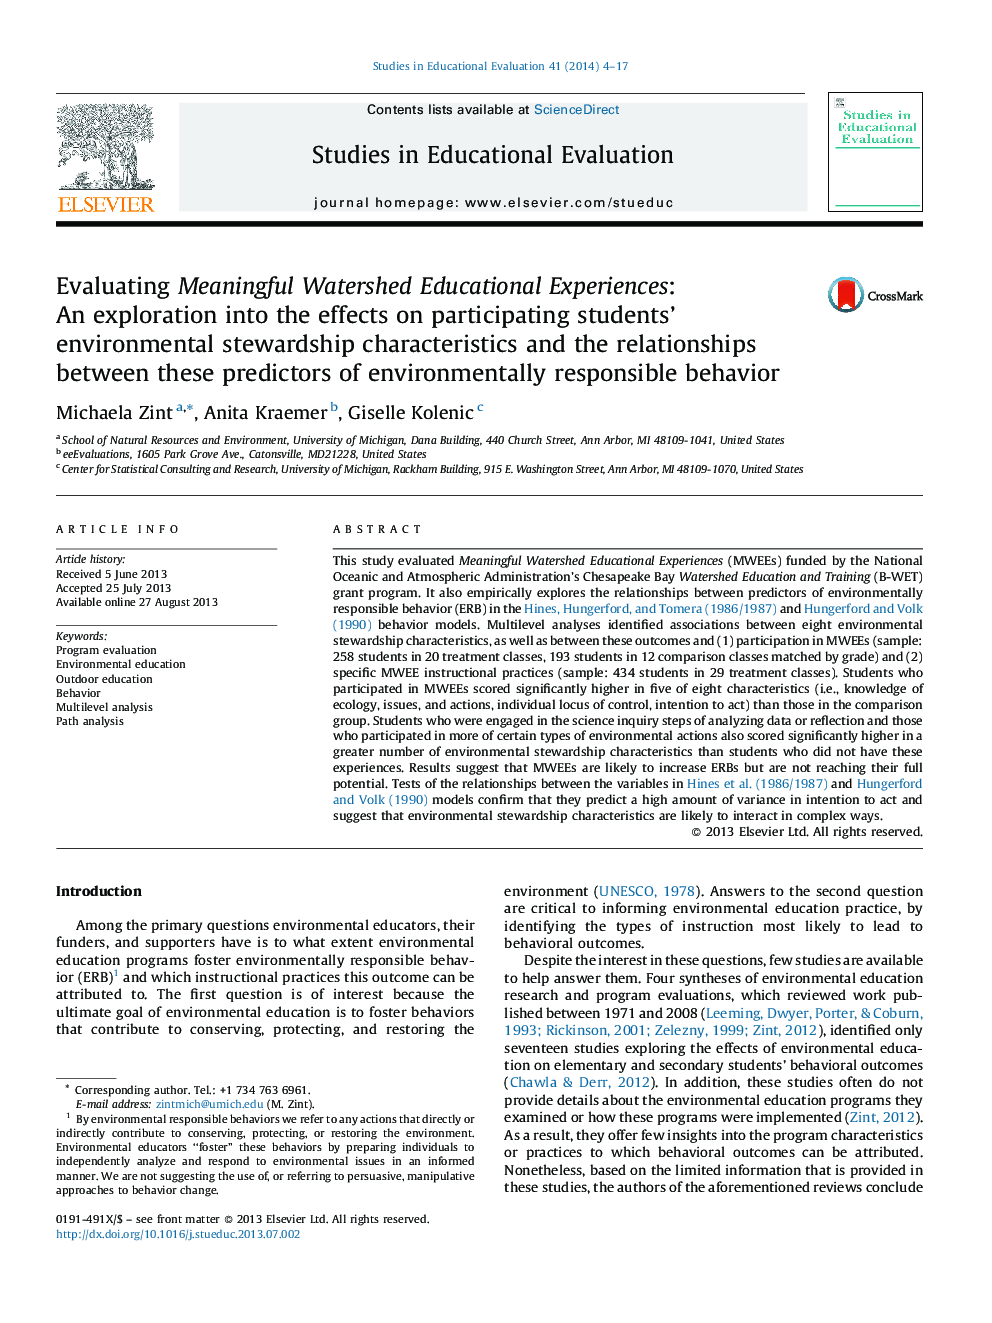 Evaluating Meaningful Watershed Educational Experiences: An exploration into the effects on participating students’ environmental stewardship characteristics and the relationships between these predictors of environmentally responsible behavior